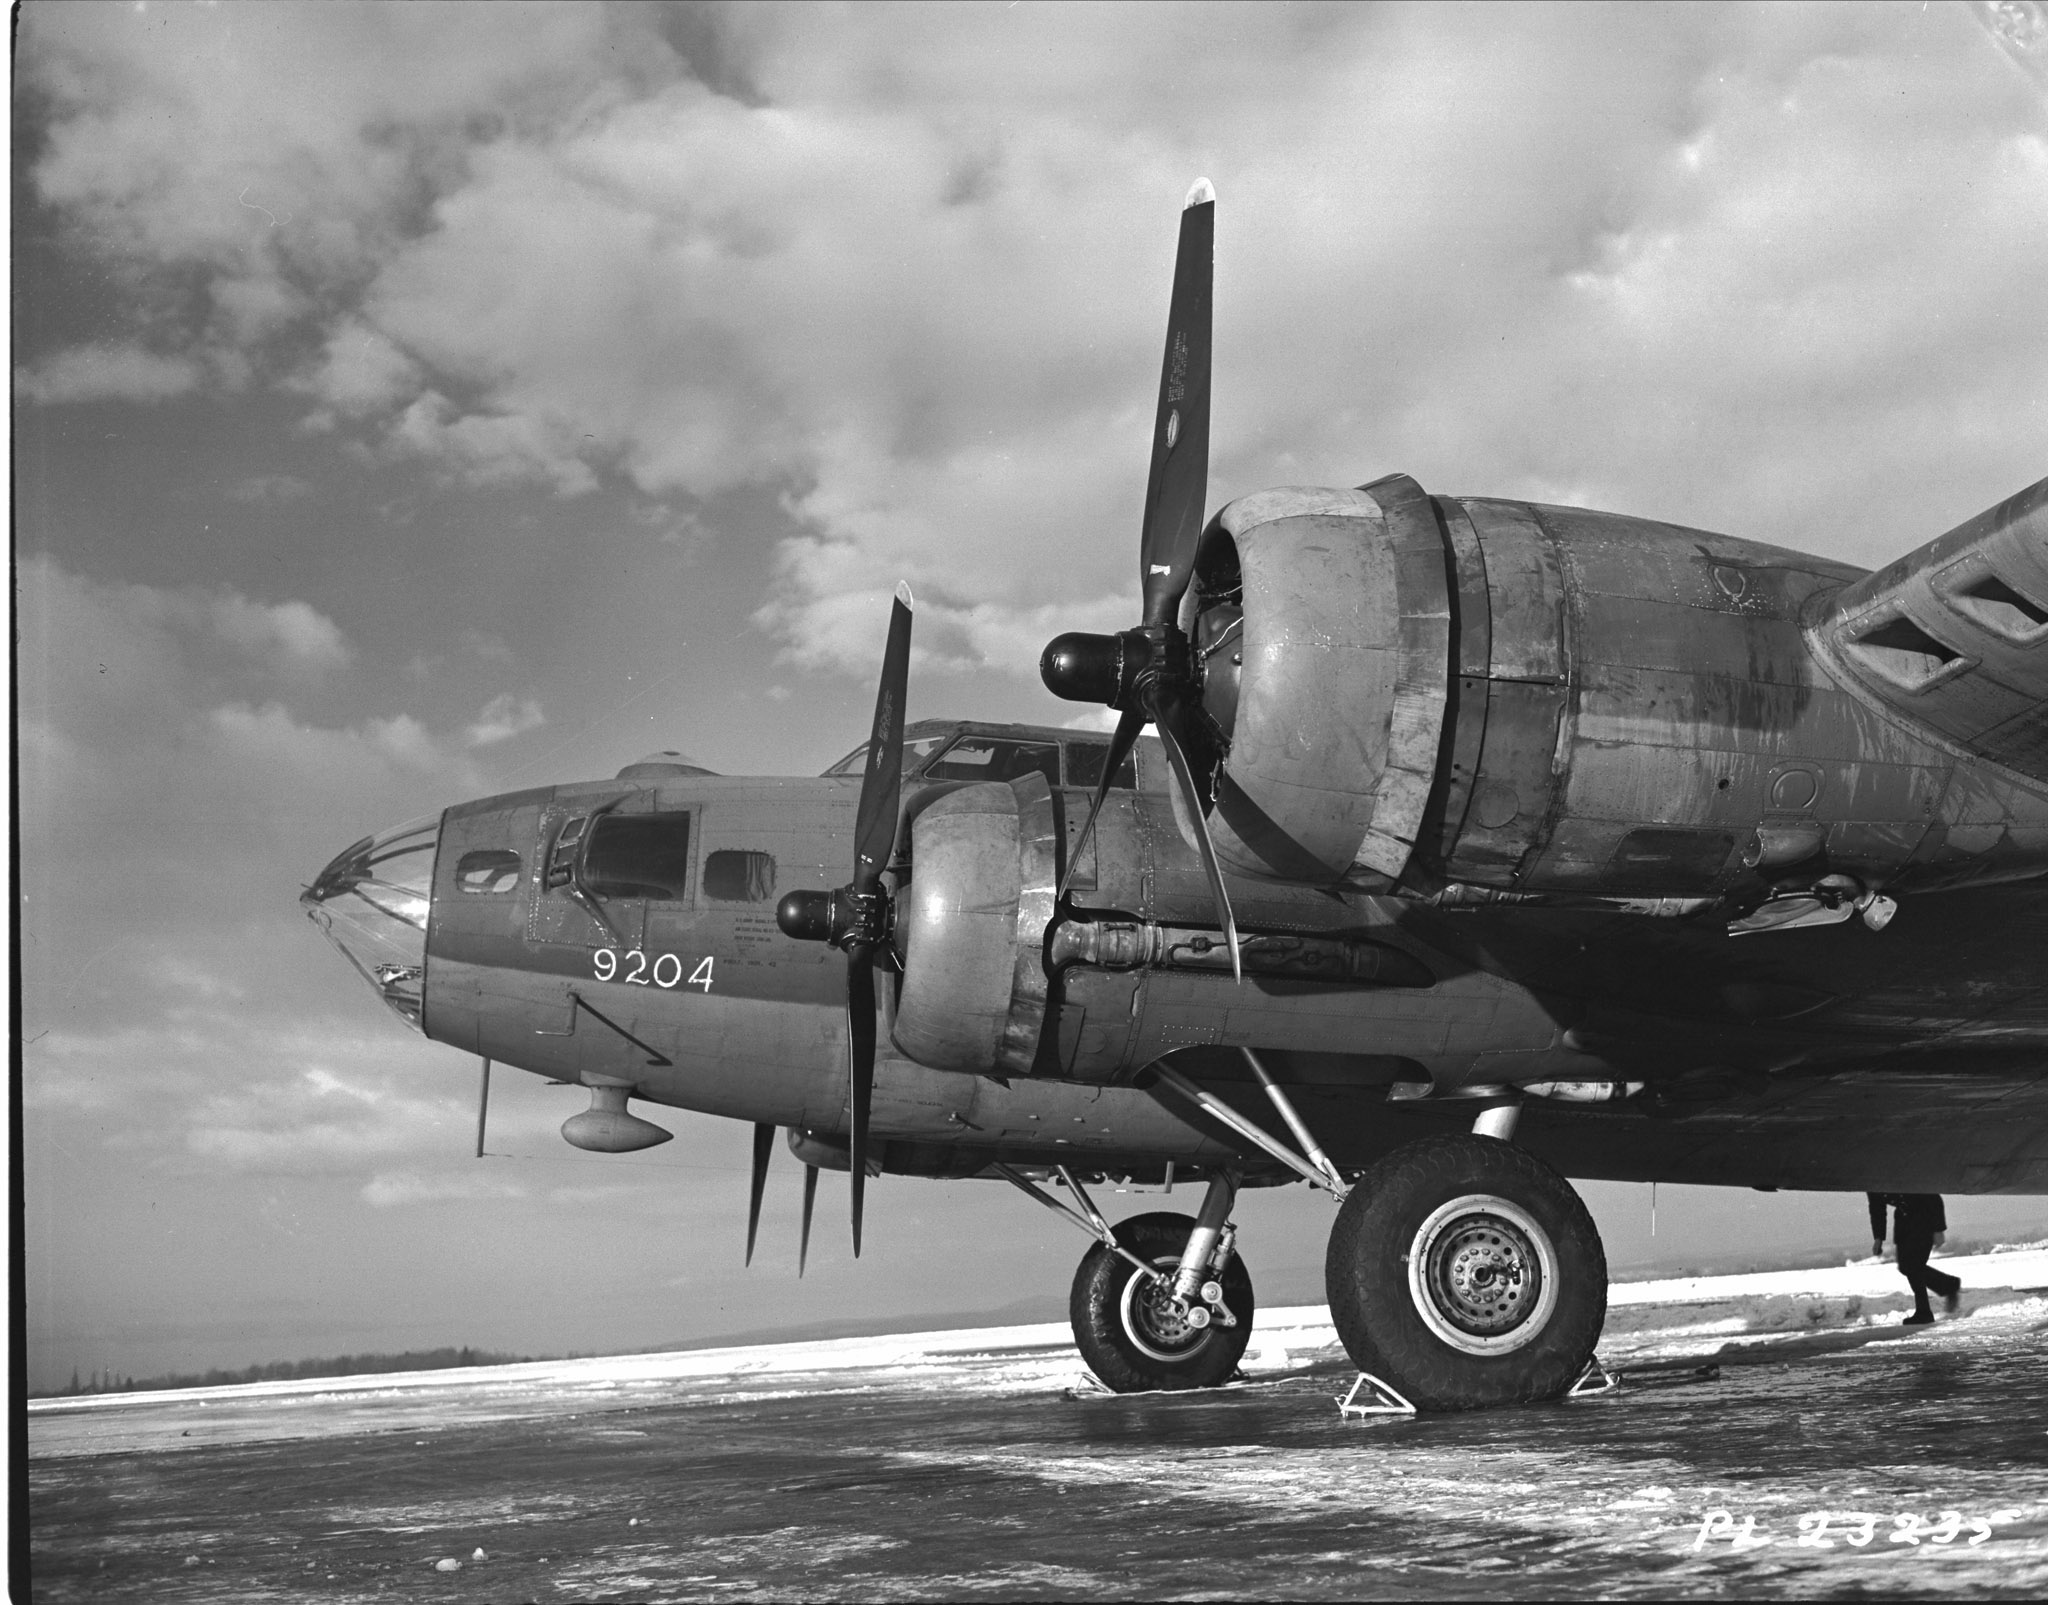 Wing Commander Bruce Middleton, commanding officer of 168 Heavy Transport Squadron, piloted this B-17 Flying Fortress from Ottawa to Britain with the first mail load of the RCAF’s new service to soldiers, sailors, and airmen serving overseas during the Second World War. The flight left Rockcliffe, near Ottawa, on December 15, 1943. PHOTO: DND Archives, PL-23235